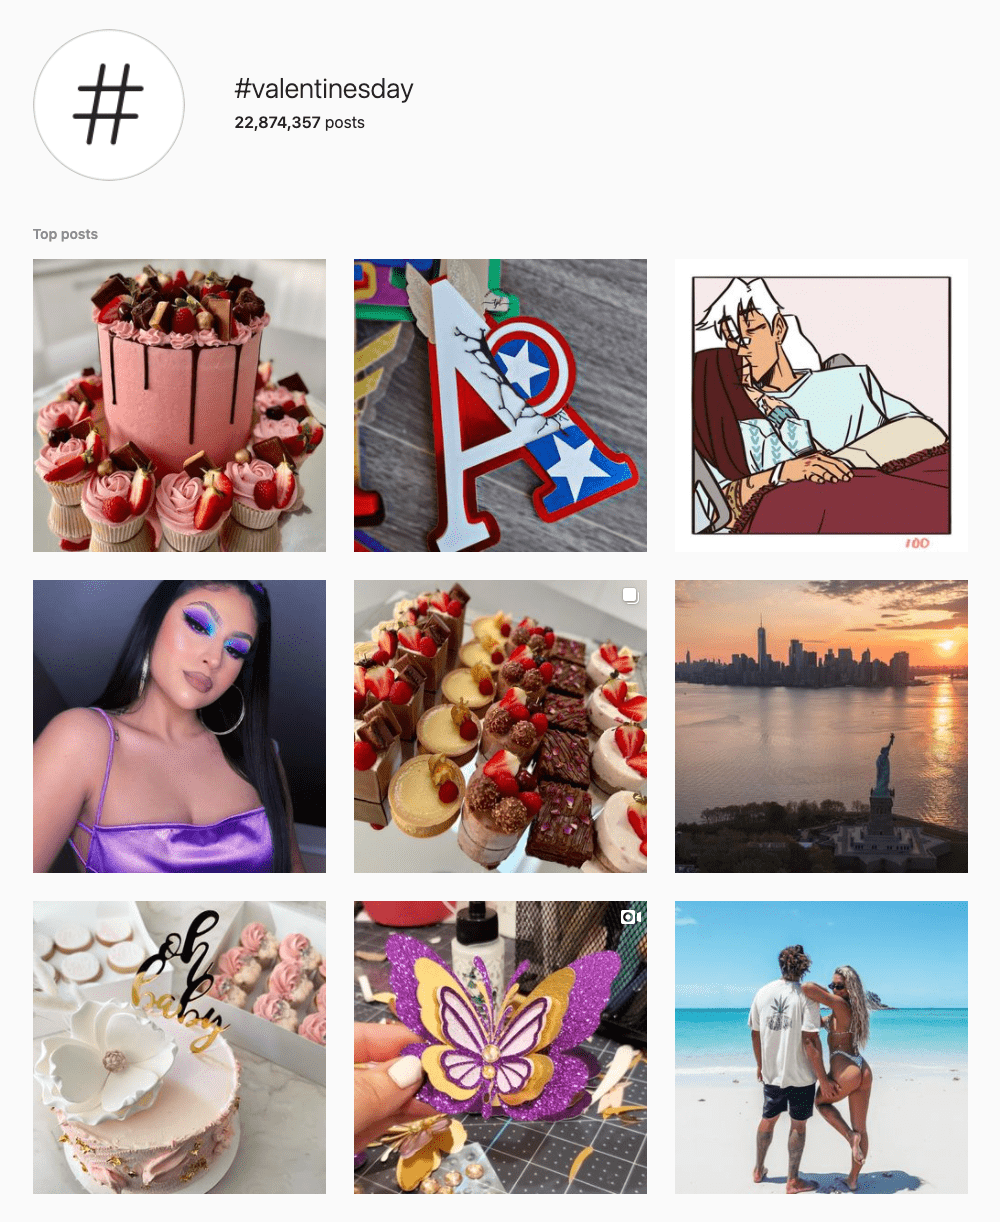 #valentinesday Hashtags for Instagram